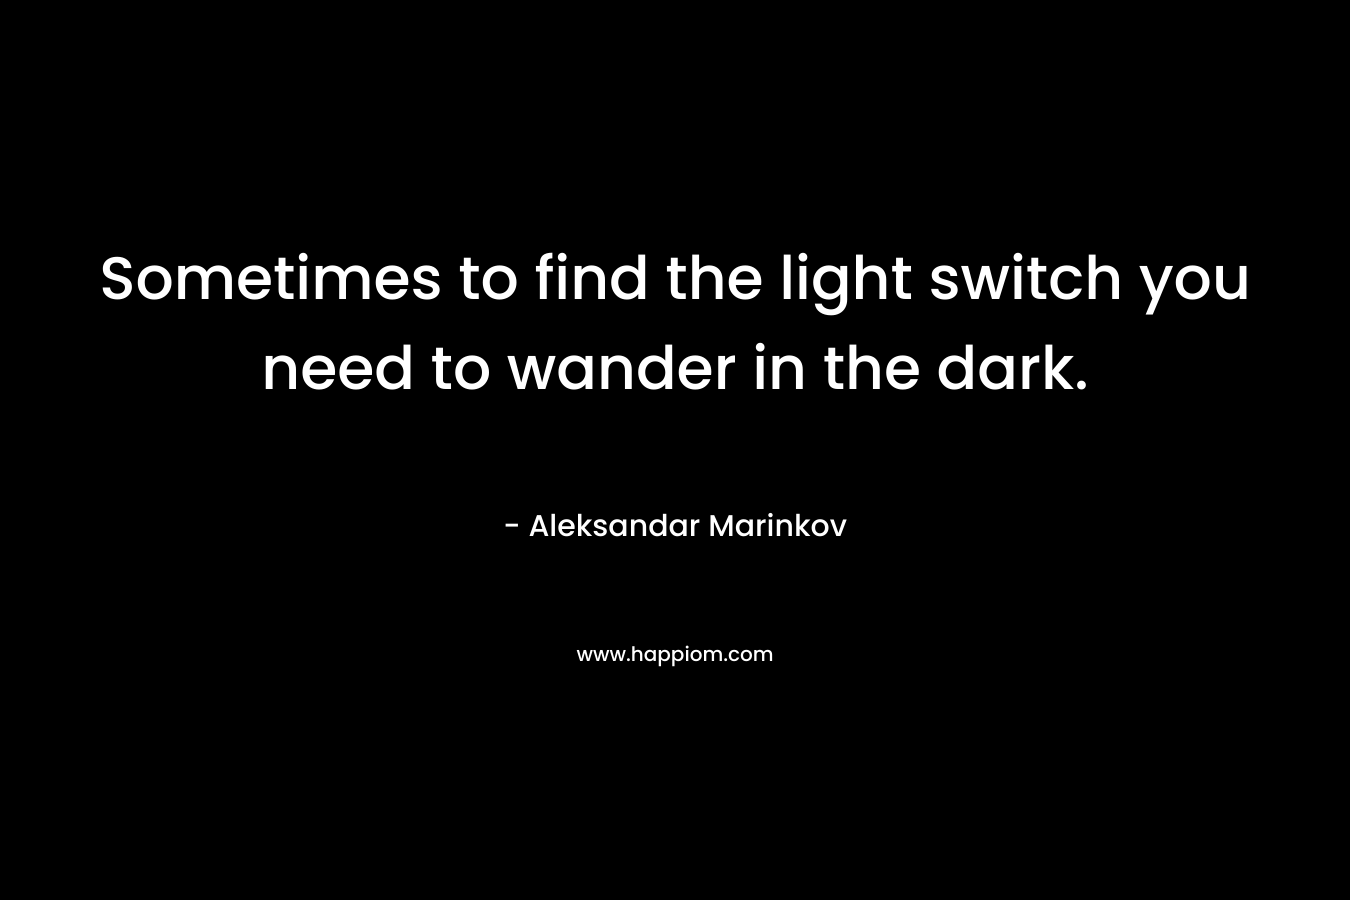 Sometimes to find the light switch you need to wander in the dark.